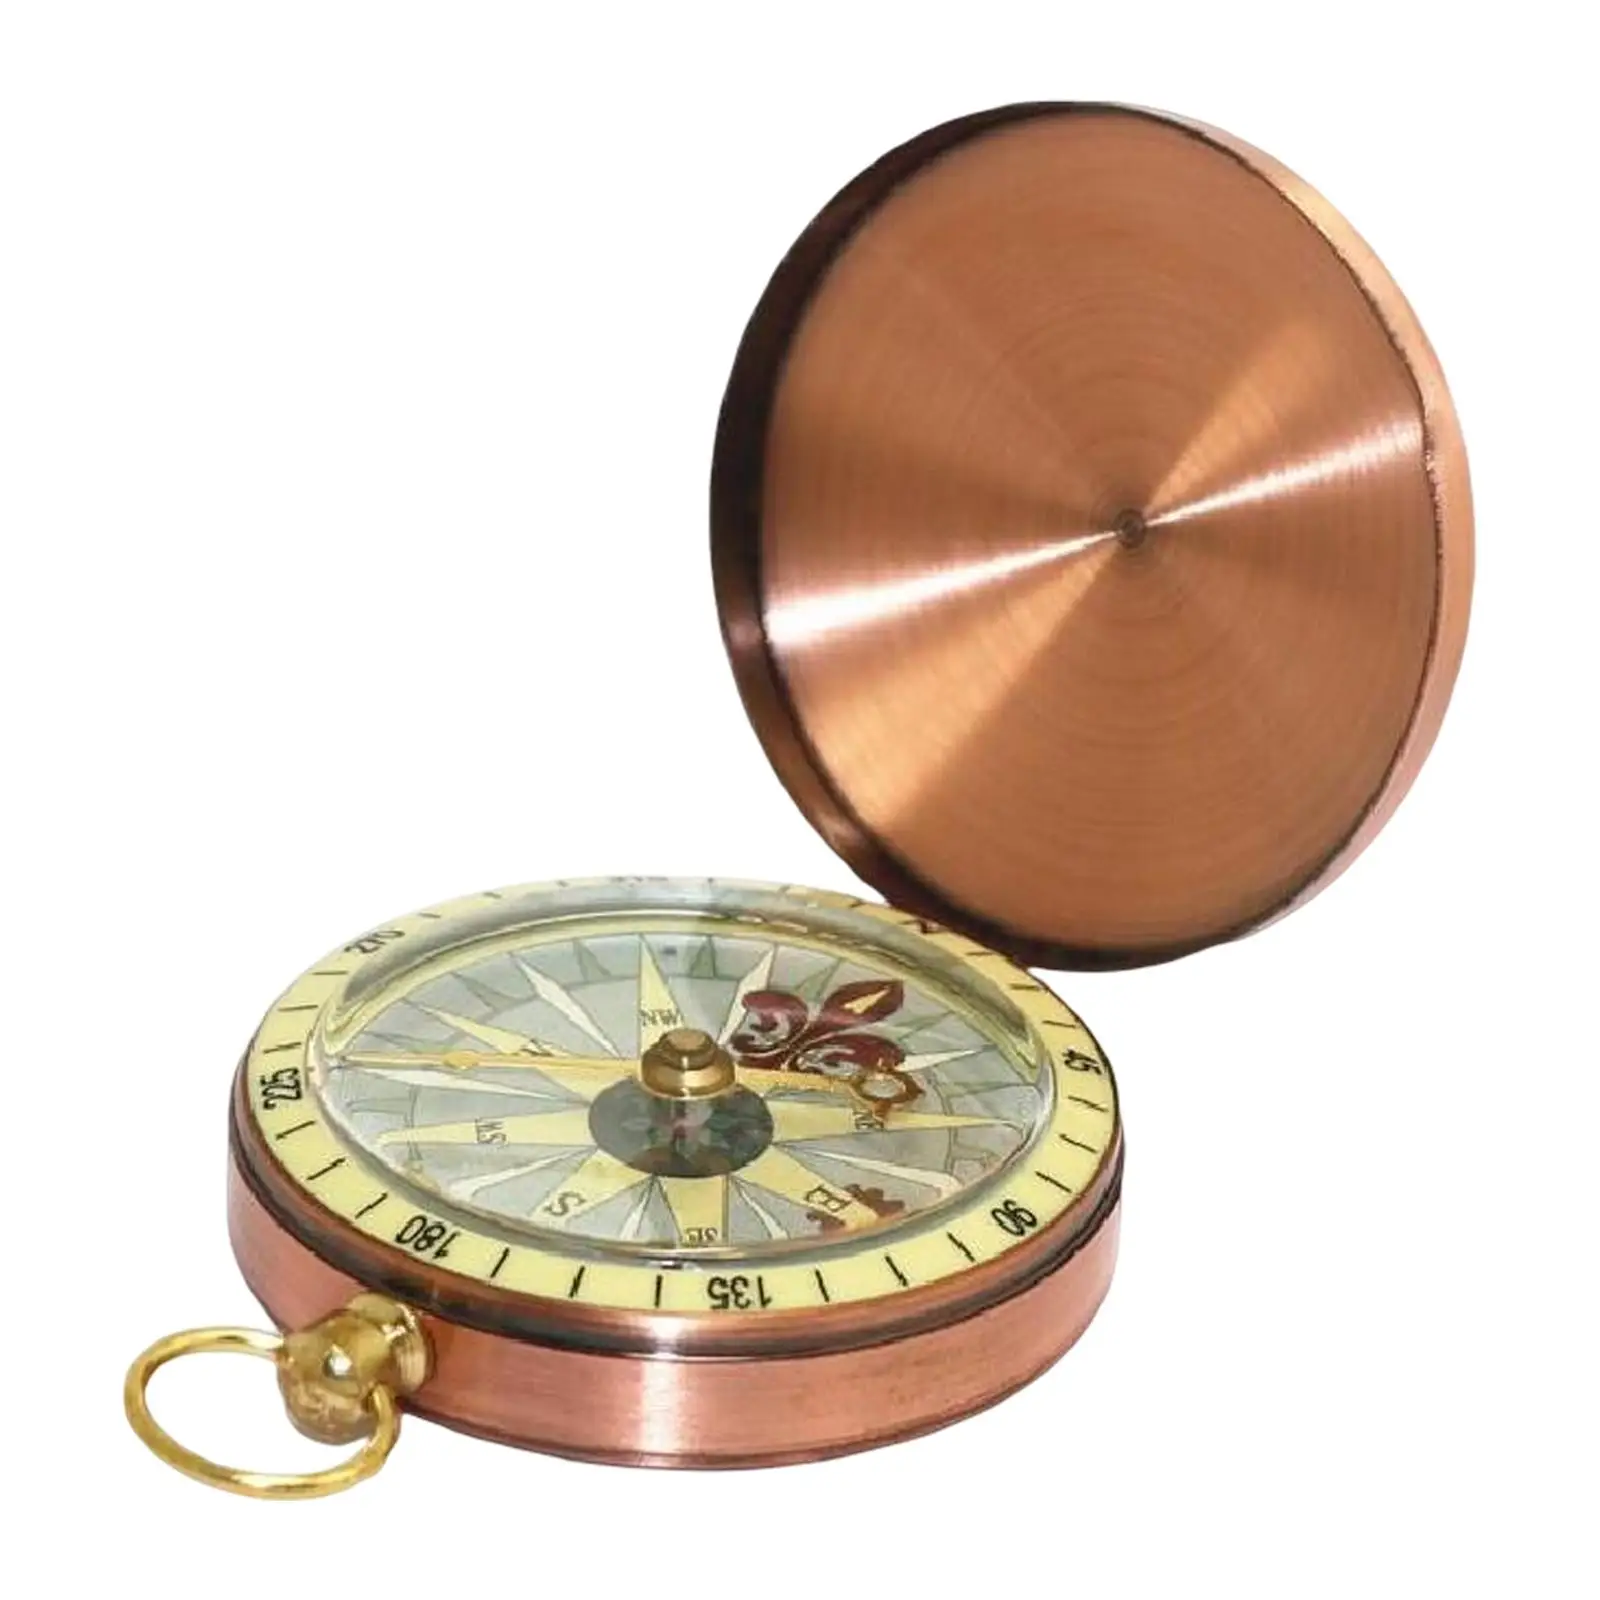 Classic Pocket Copper Compass Accurate Portable Handheld Old Fashioned for Backpacking Outdoor Hiking Camping Birthday Gift